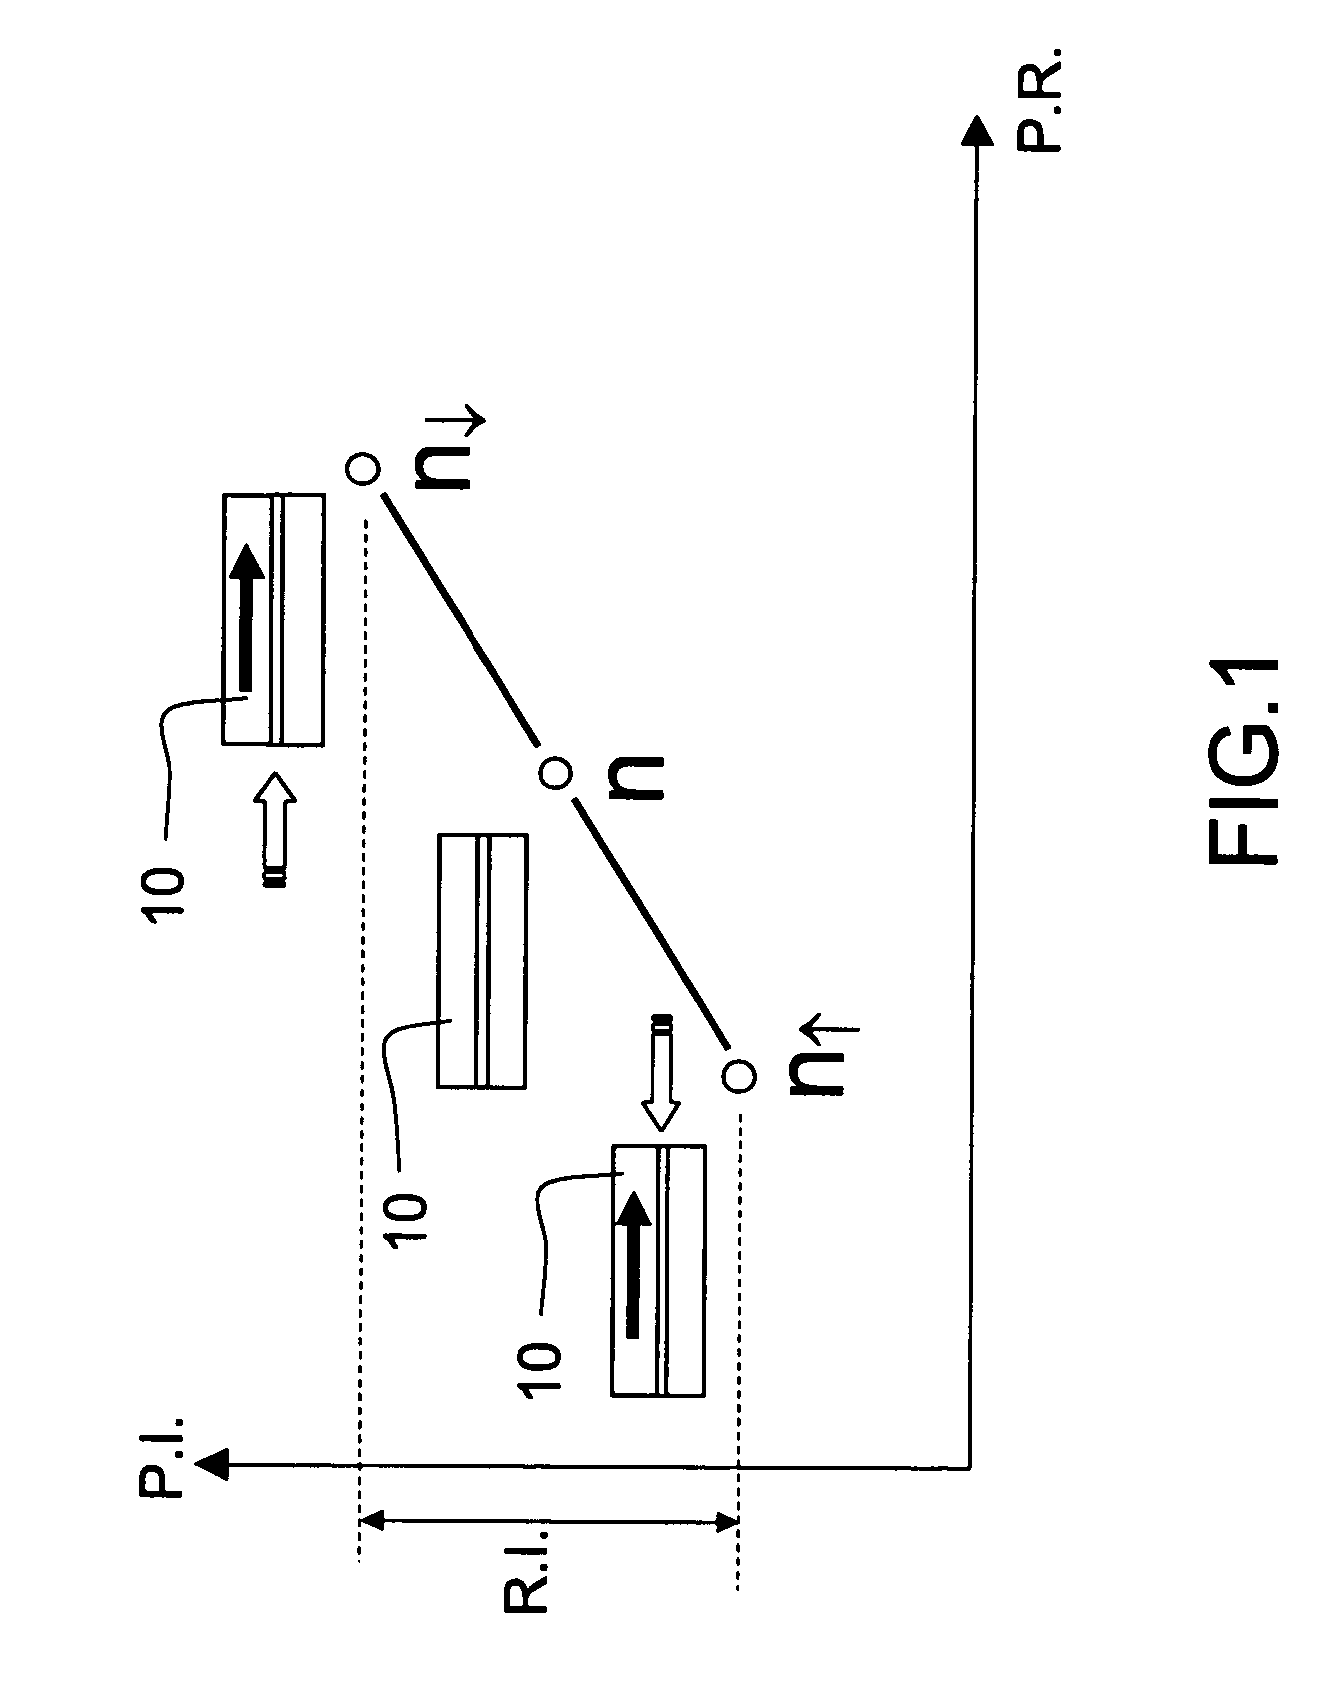 Optical device with integrated semi-conductor laser source and integrated optical isolator